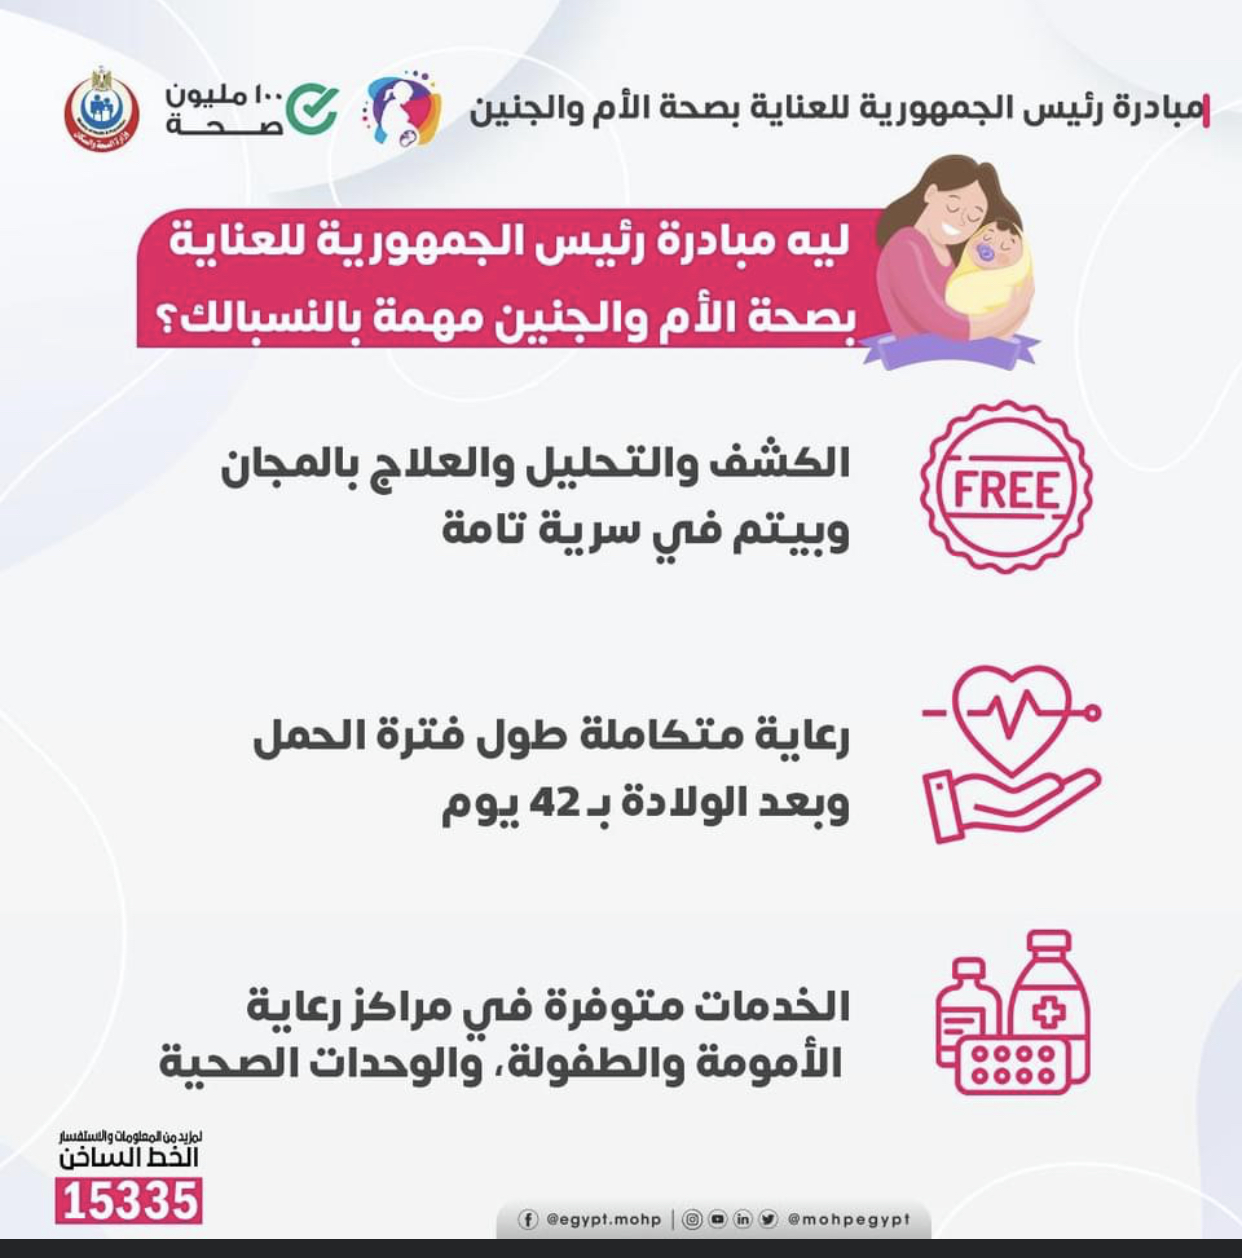 Mothers Health Initiative